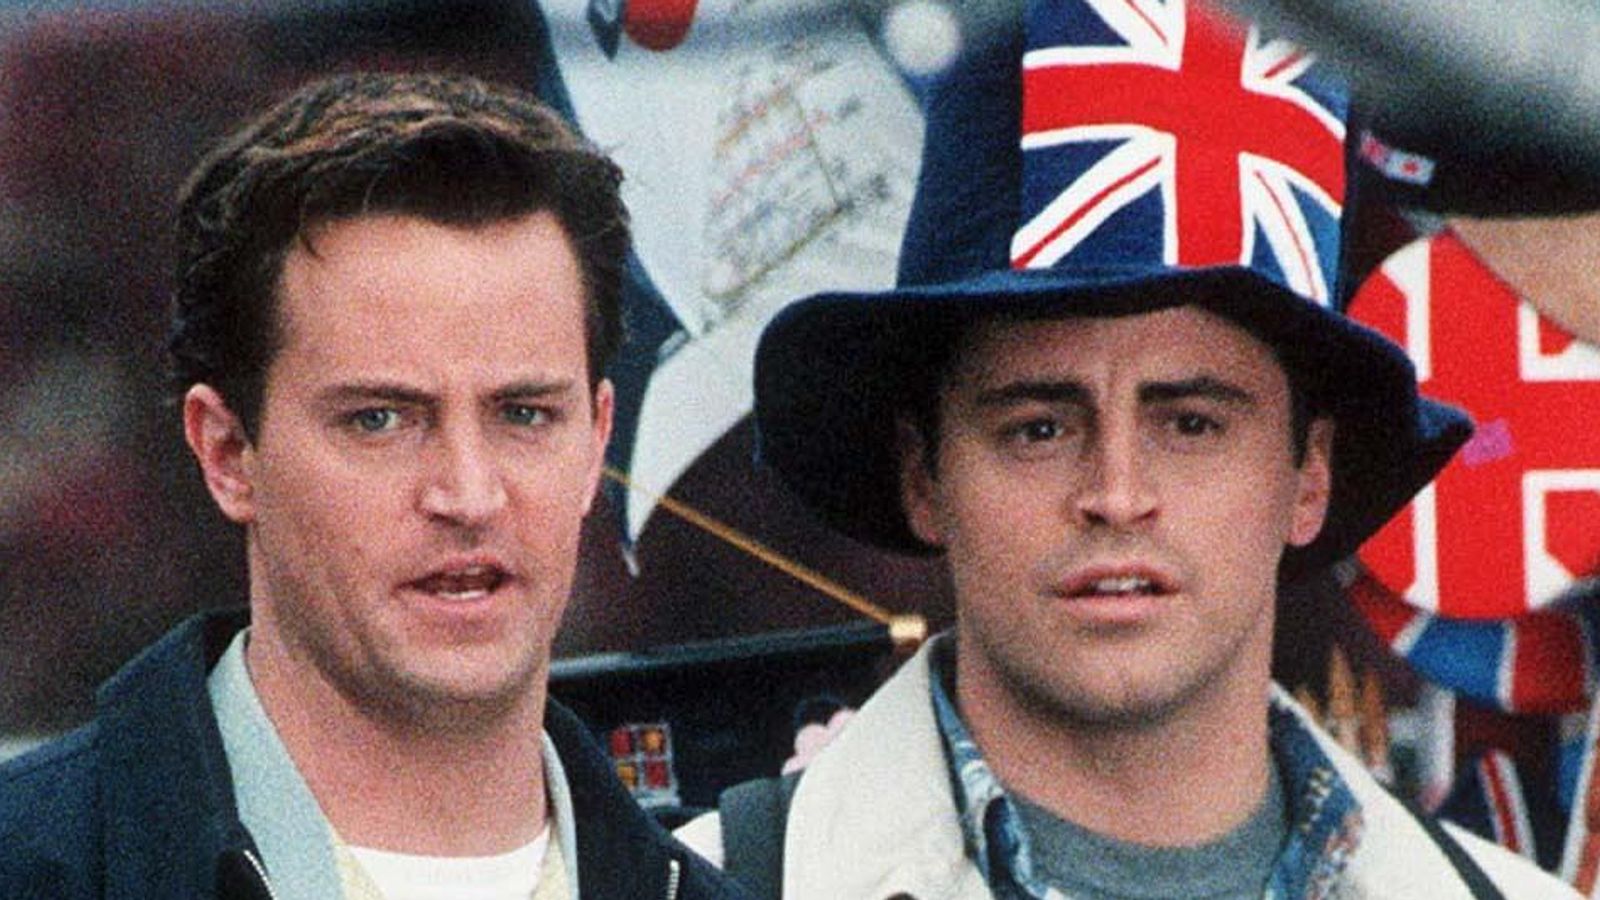 'I'll never forget you': Matt LeBlanc pays tribute to Friends co-star Matthew Perry